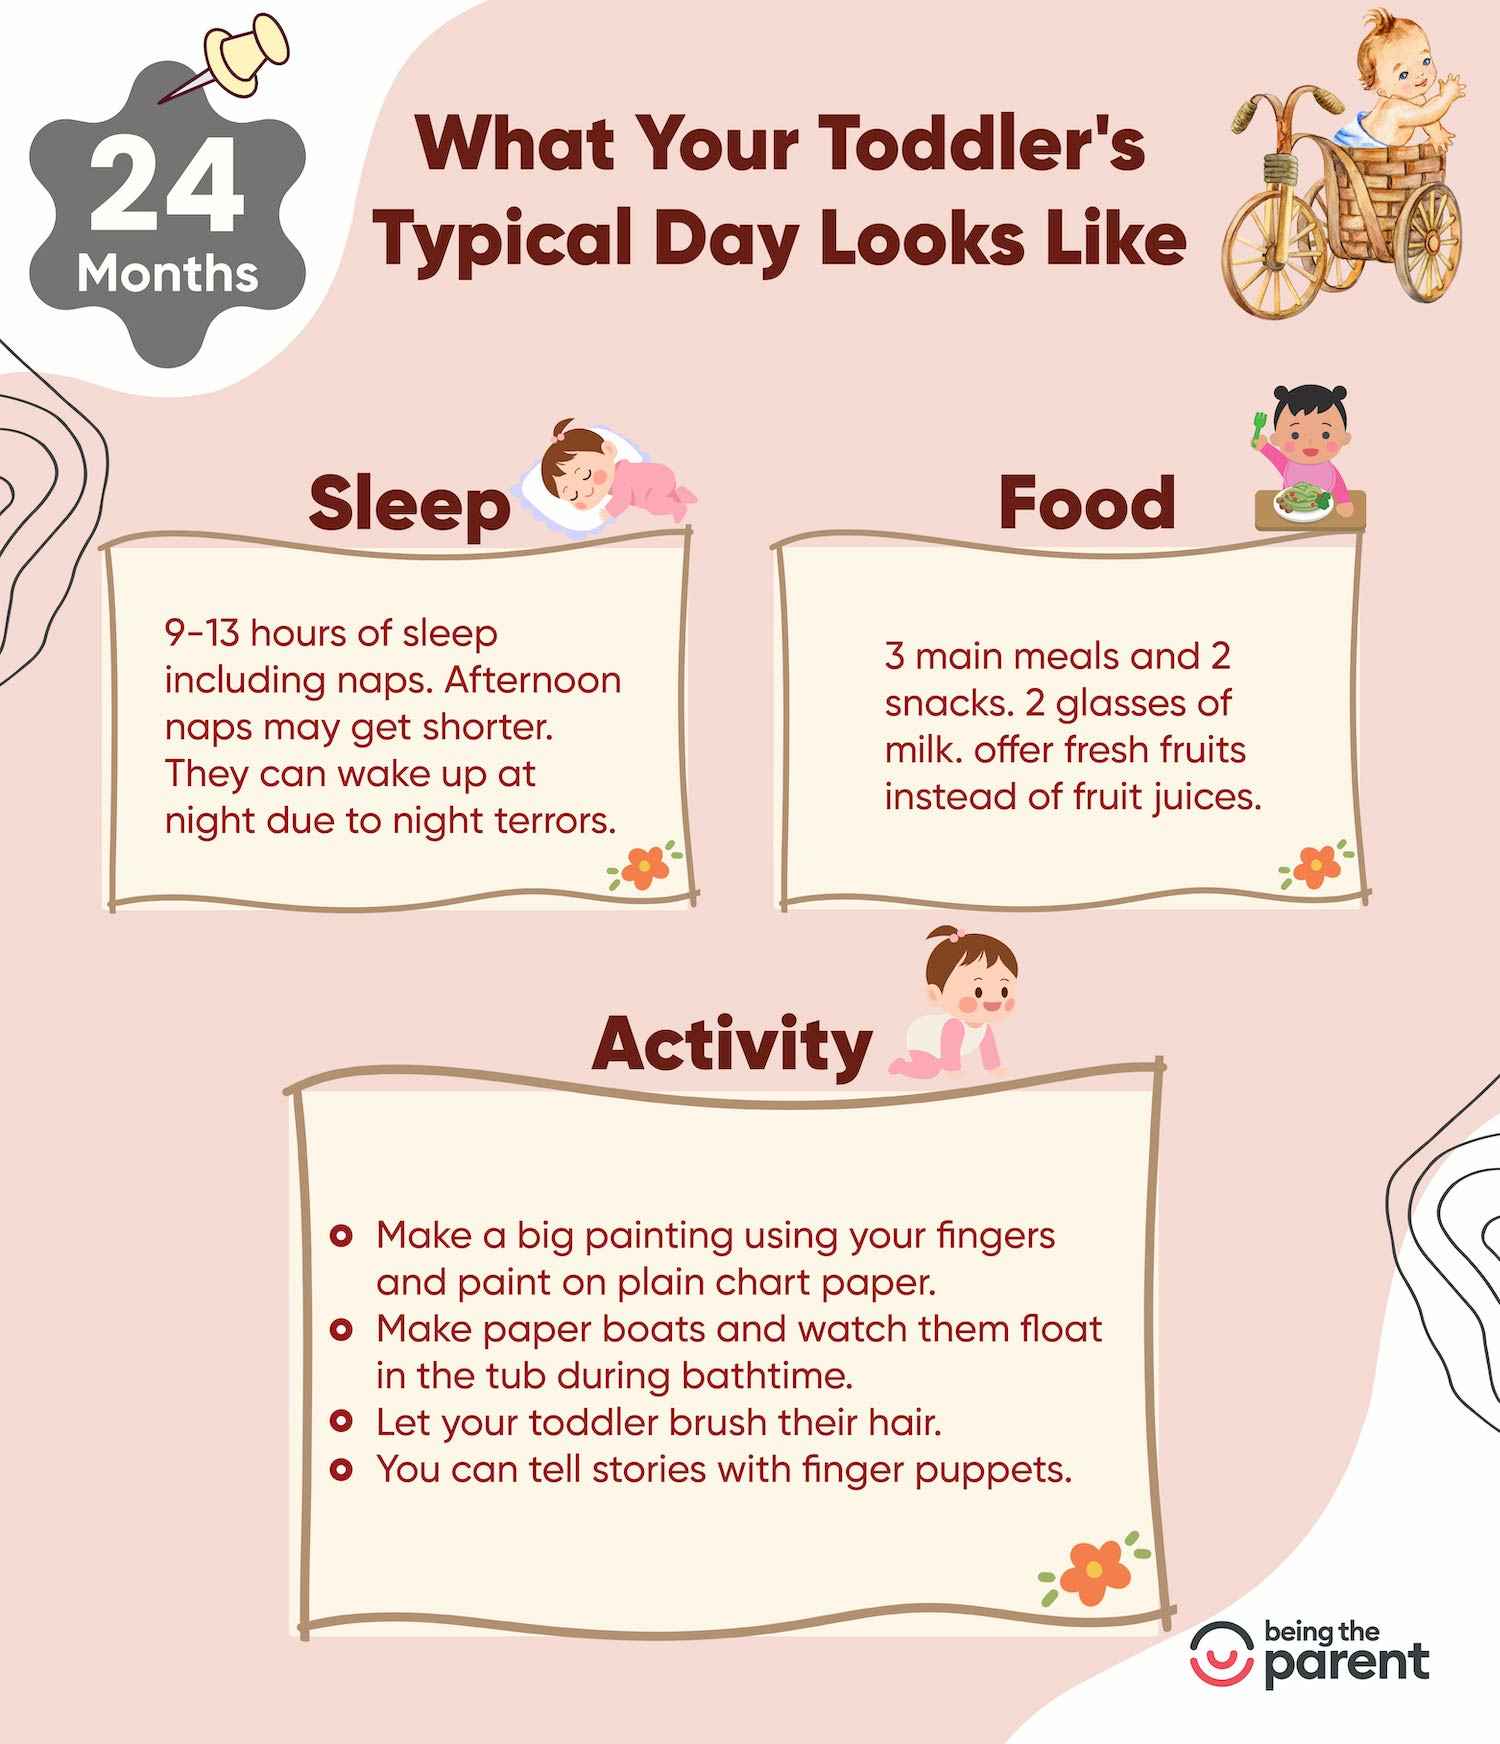 What Your Toddler’s Typical Day Looks Like?